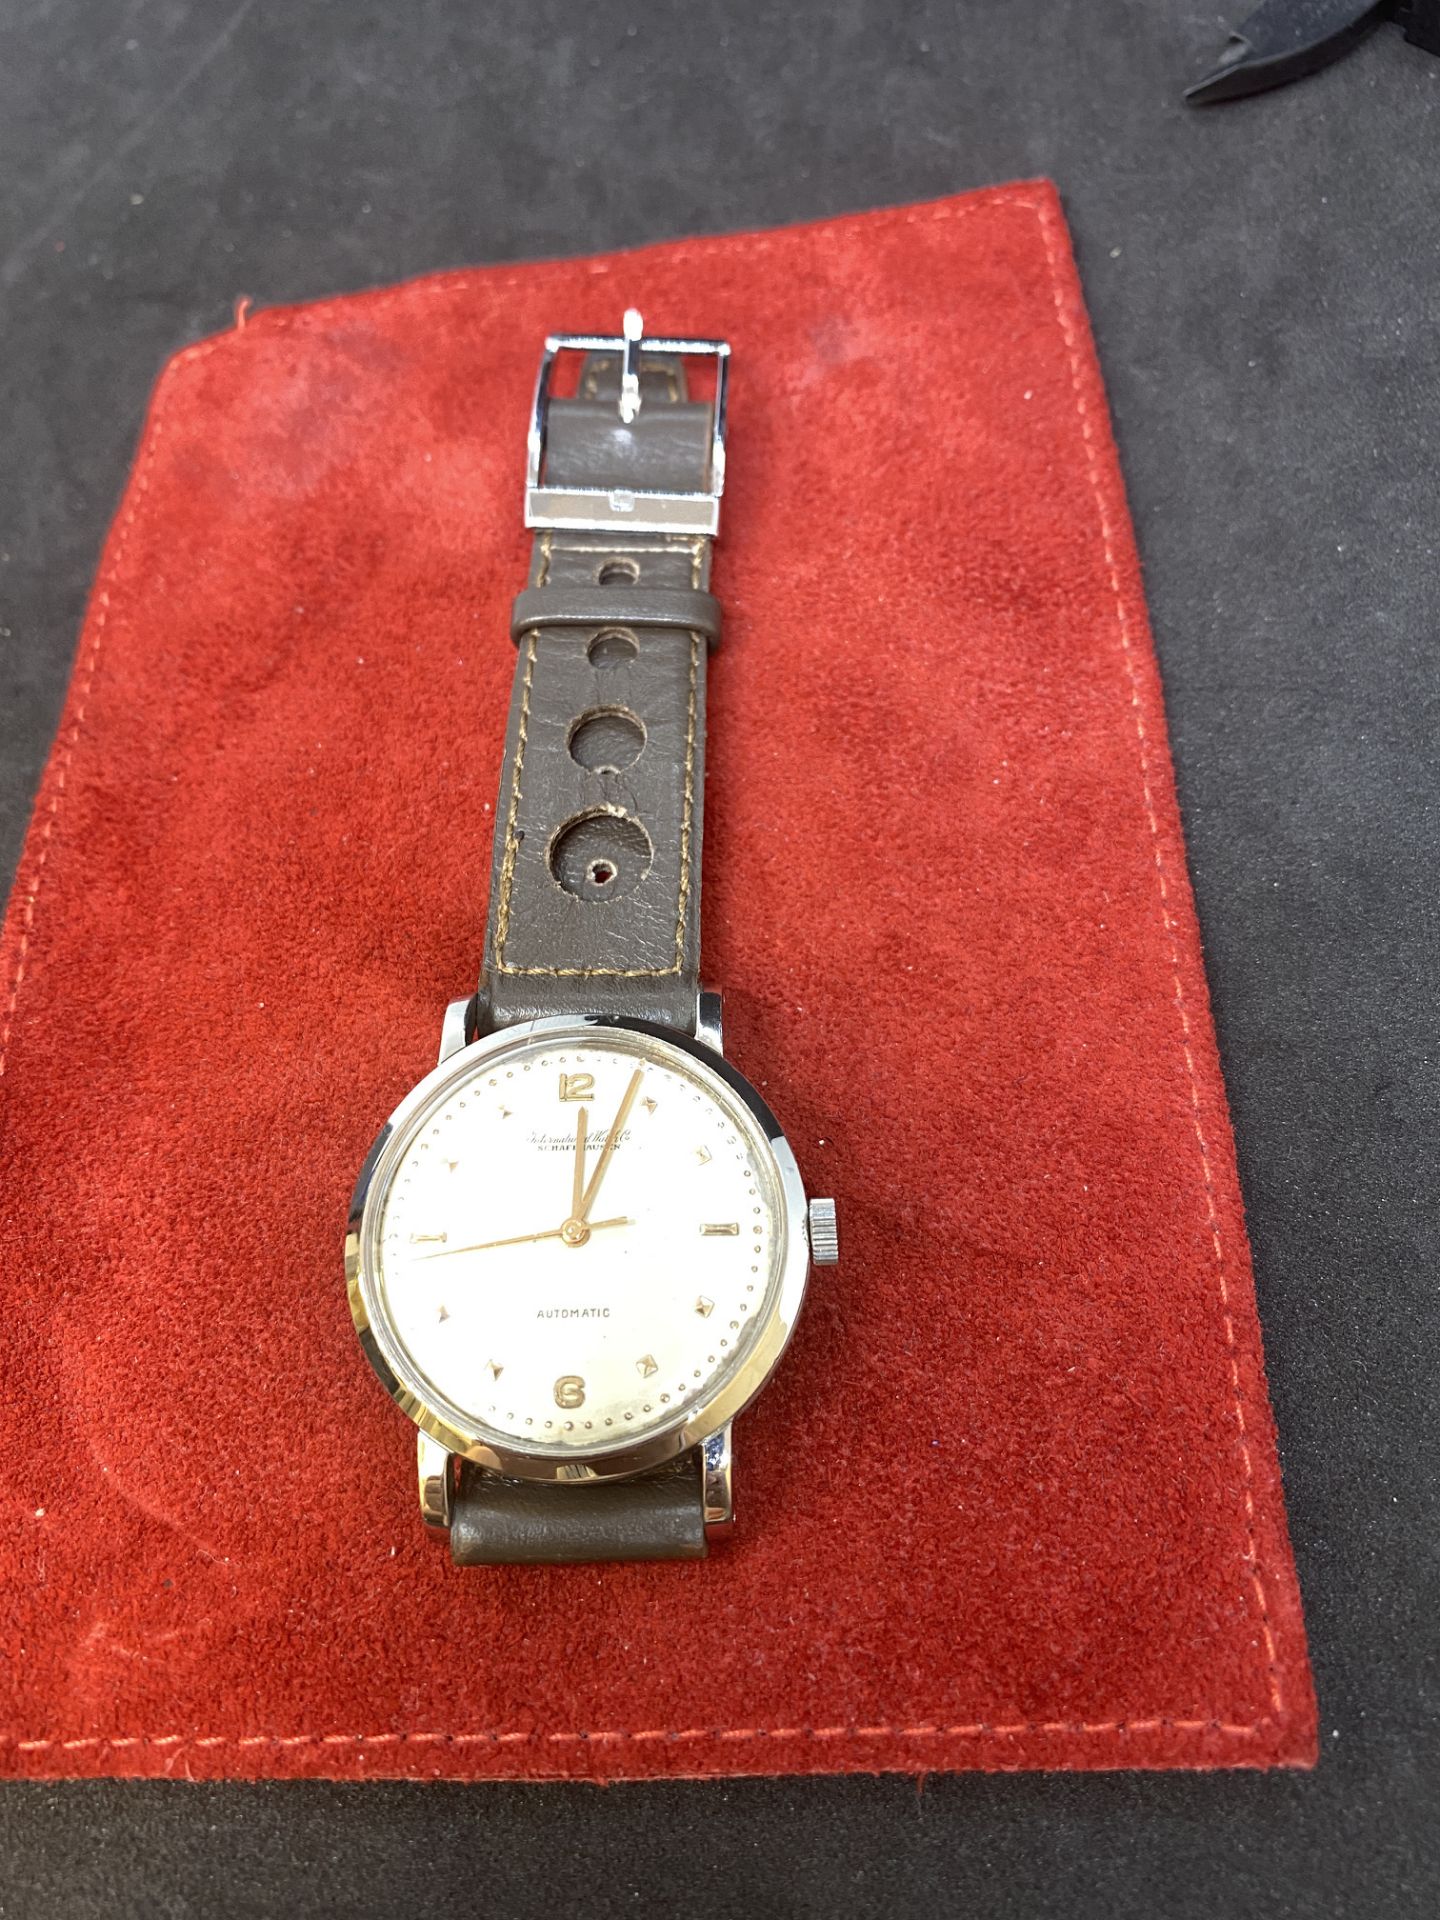 VINTAGE IWC WATCH - Image 4 of 8